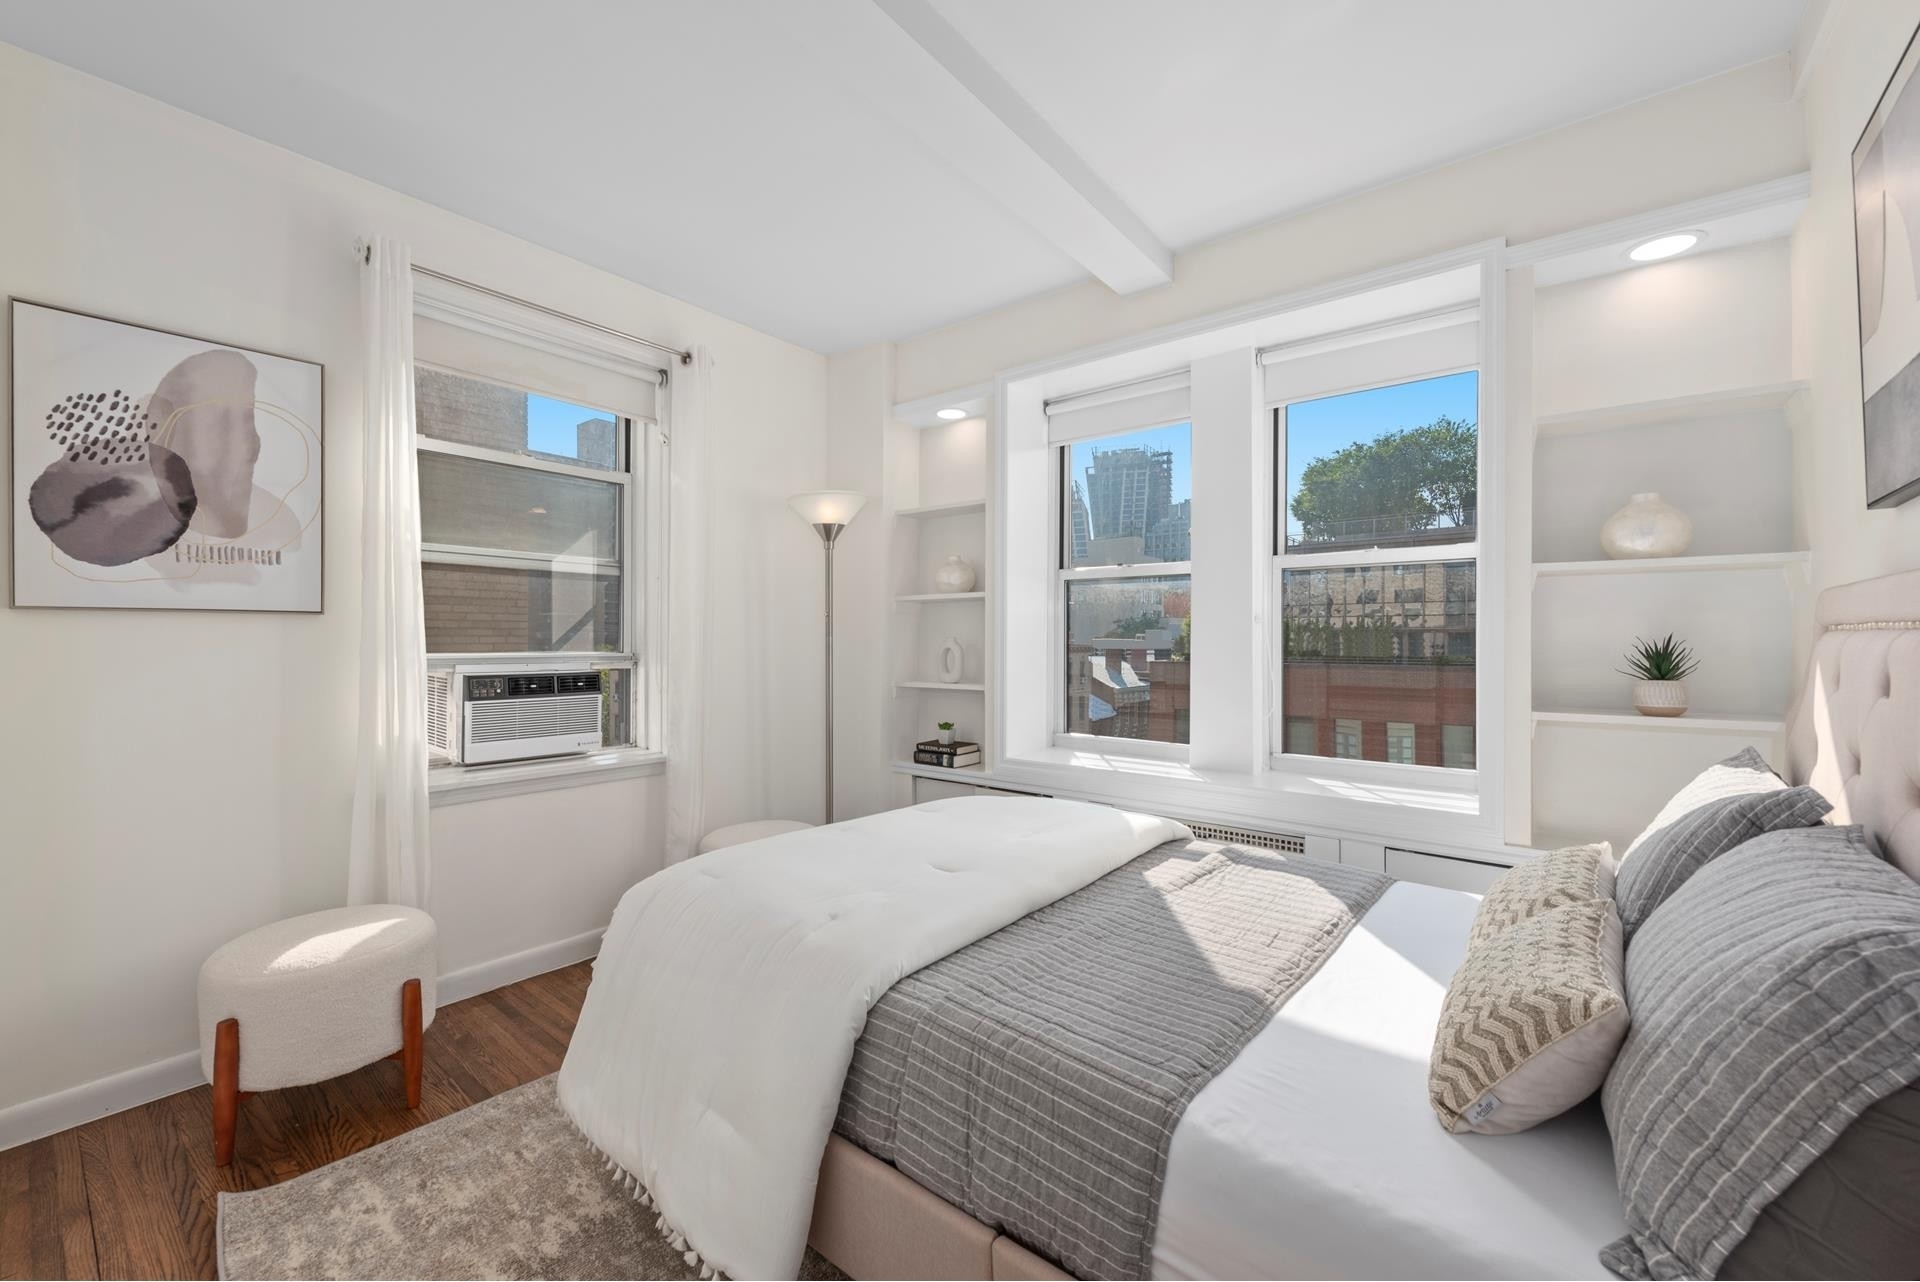 6. Co-op Properties for Sale at Chelsea Square, 365 W 20TH ST, 7C Chelsea, New York, NY 10011